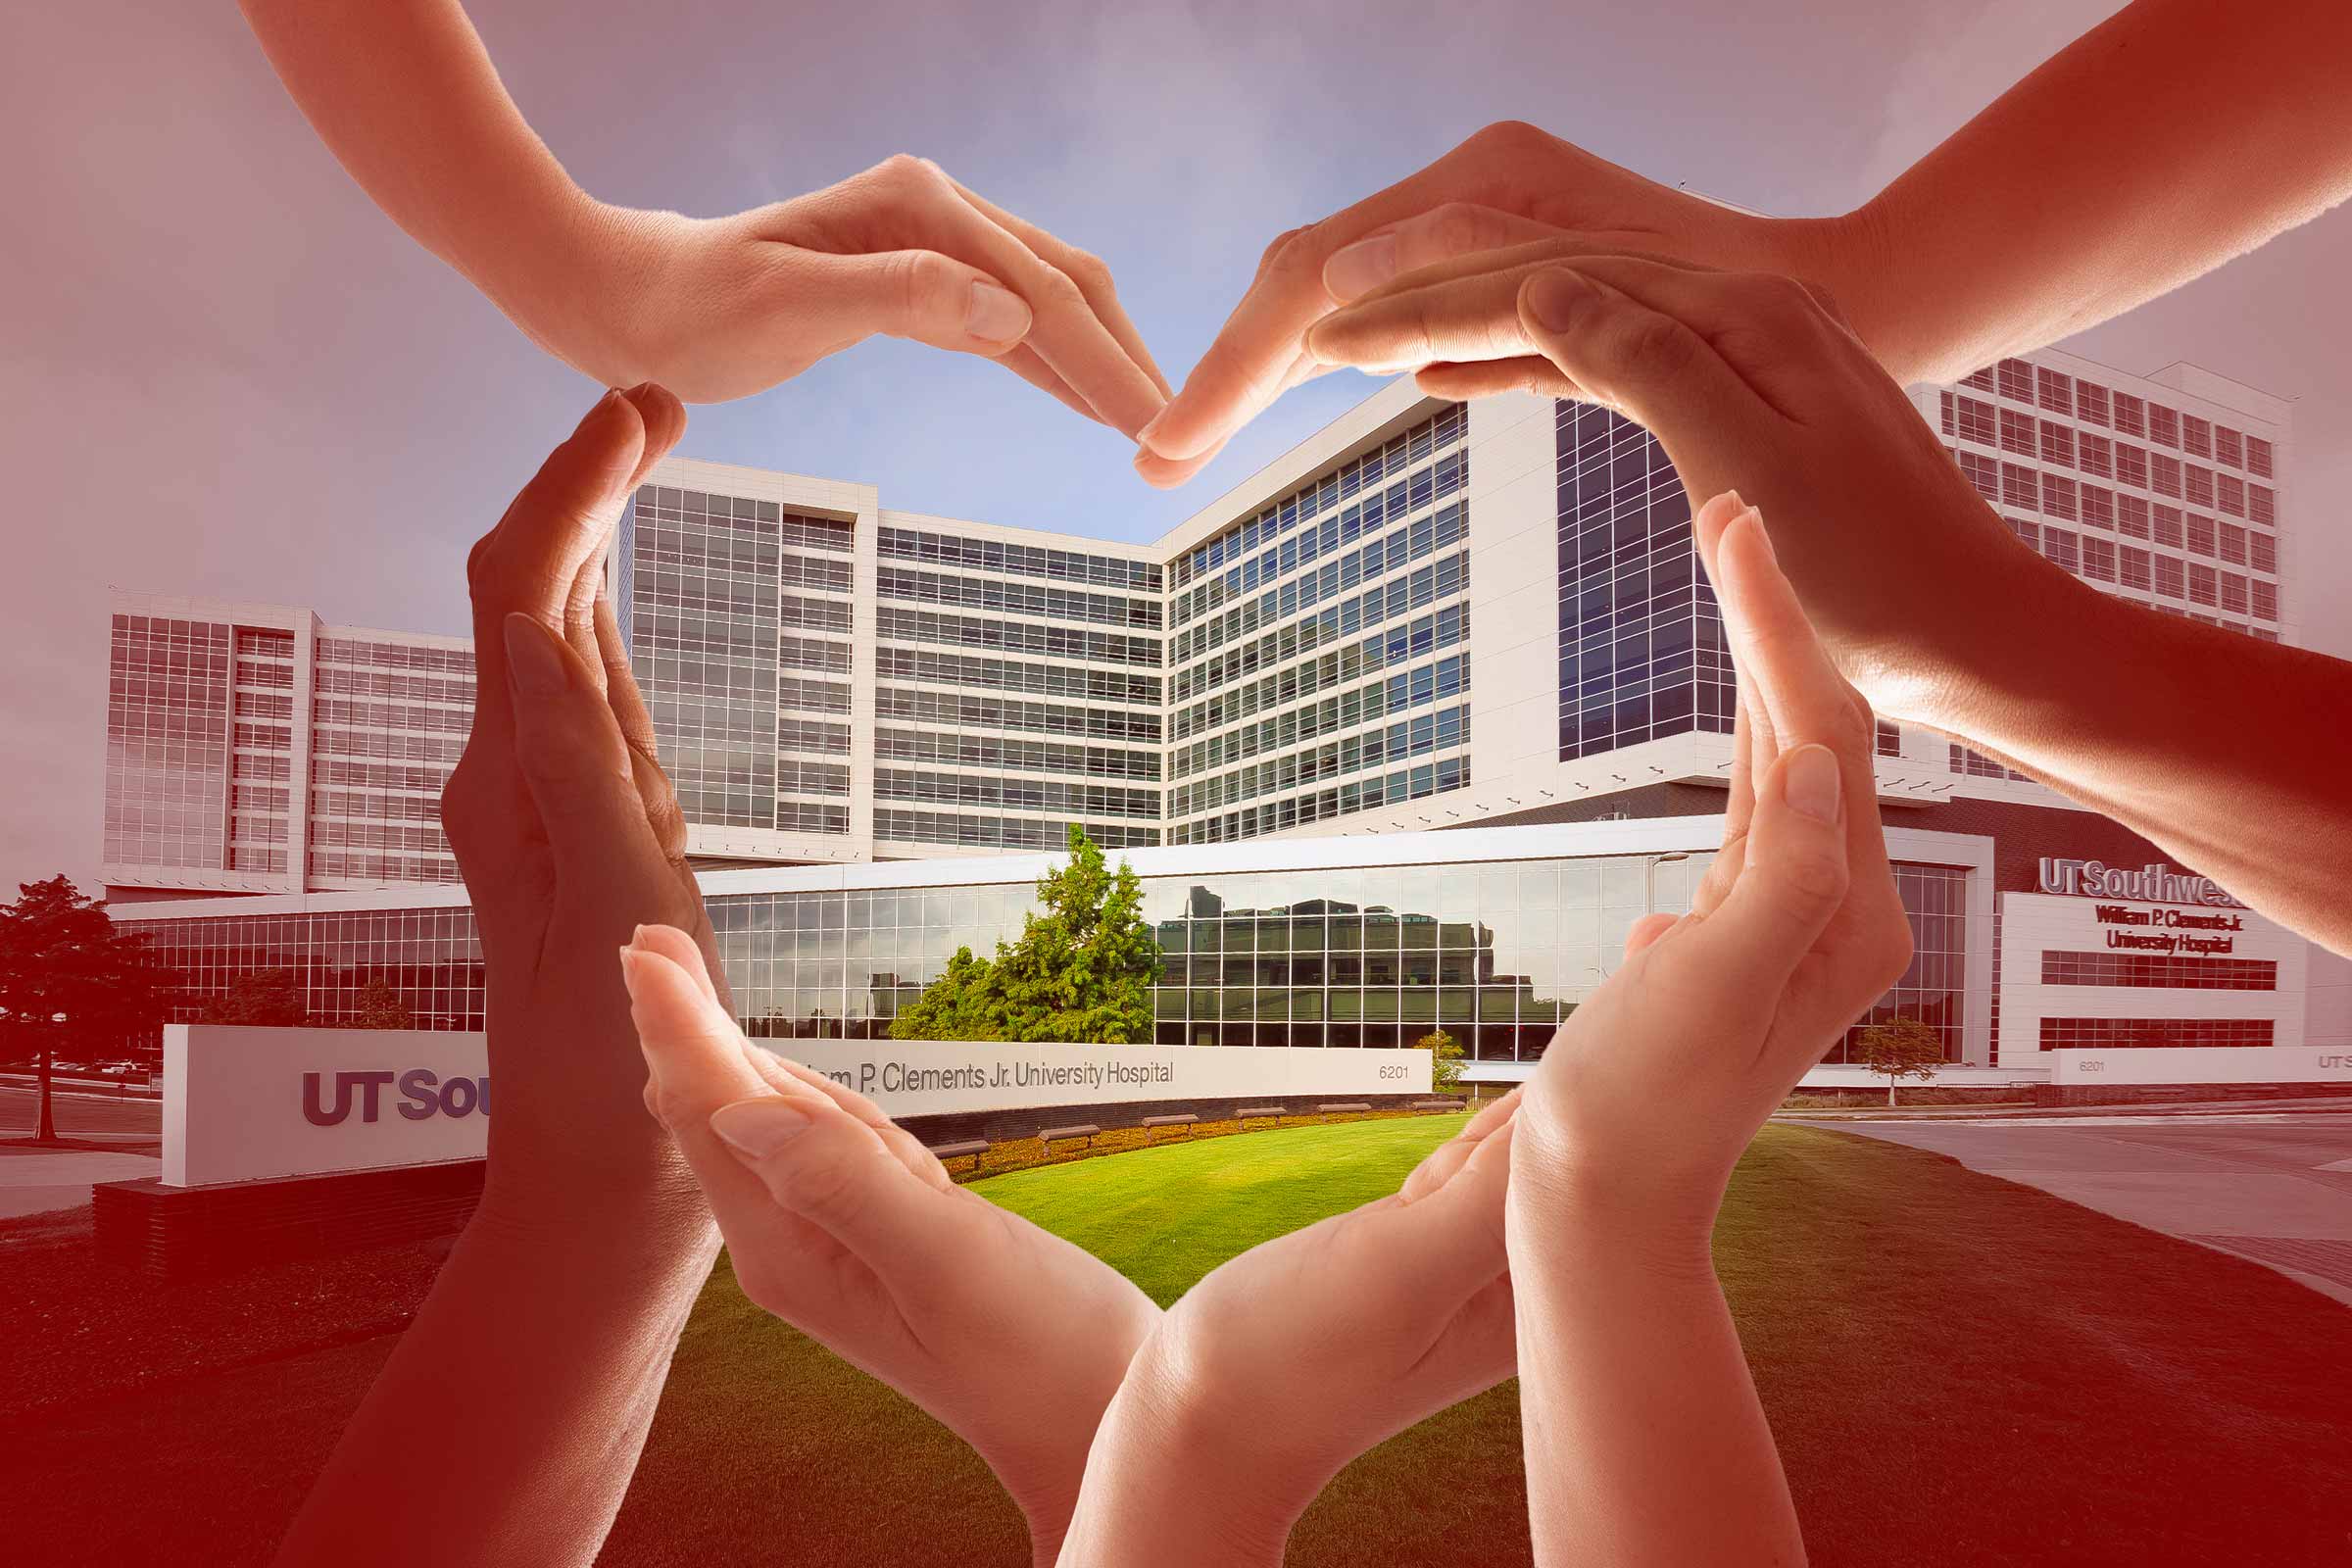 Image of multiple peoples hands arranged in the shape of a heart in front of a photo of William P. Clements Jr. University Hospital.